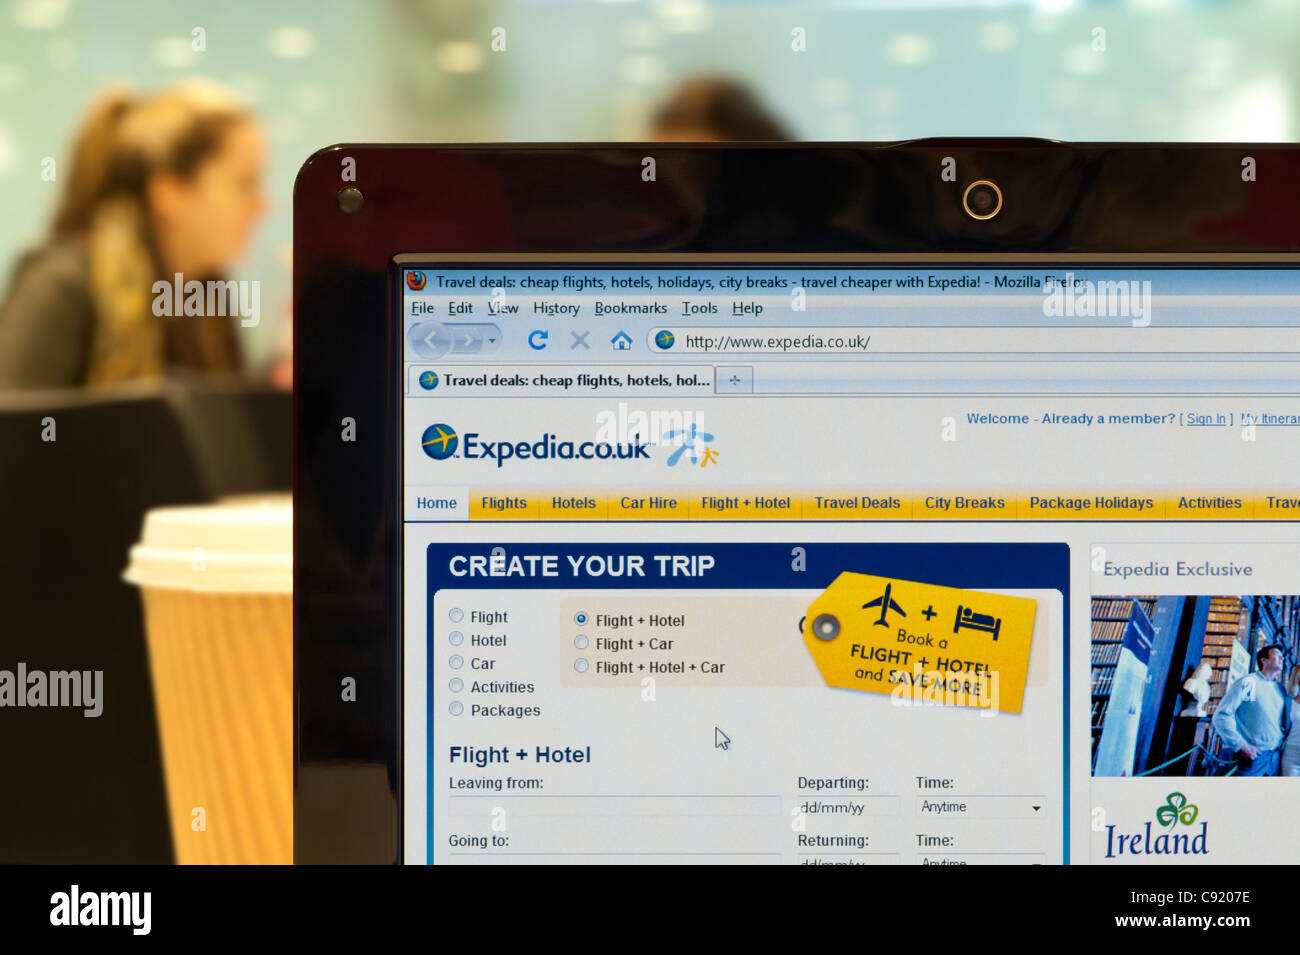 The Expedia website shot in a coffee shop environment (Editorial use only: print, TV, e-book and editorial website). Stock Photo